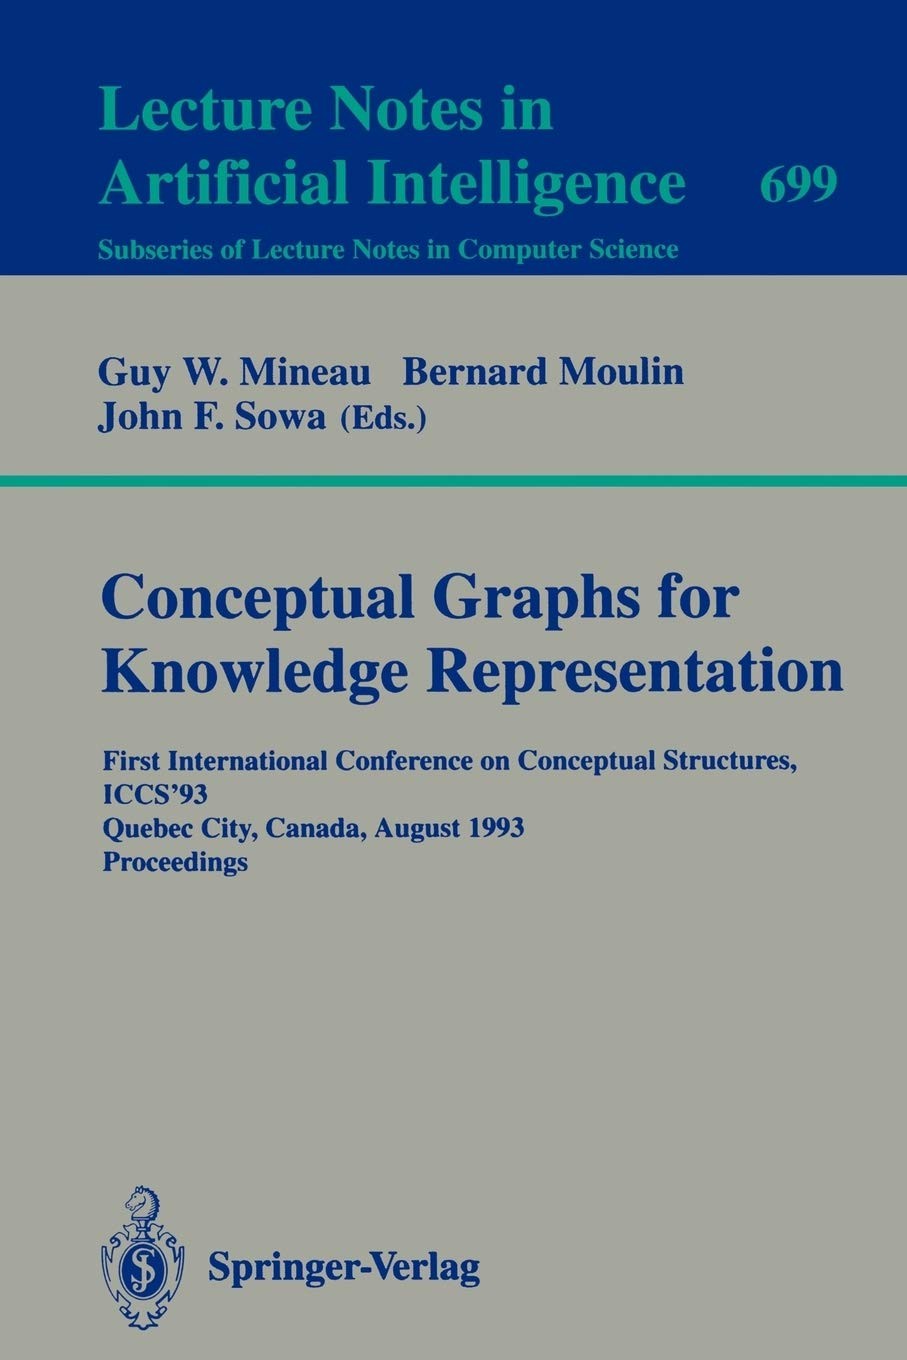 Conceptual Graphs for Knowledge Representation: First International Conference on Conceptual Structures, ICCS'93, Quebec City, Canada, August 4-7, 1993, Proceedings